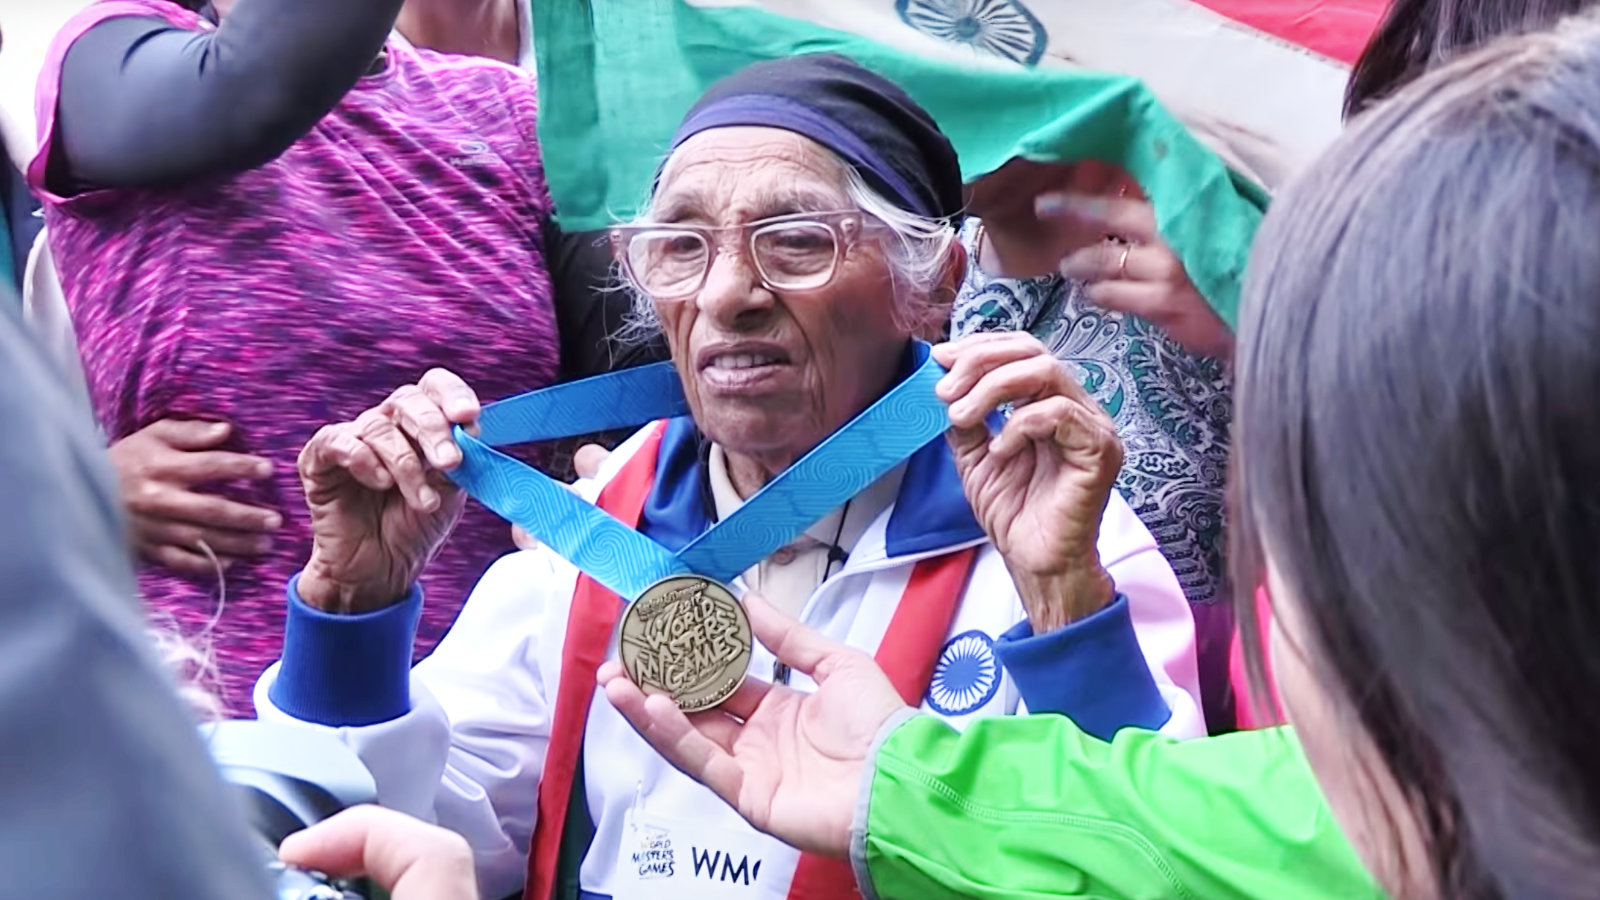 How to Start Running at Age 100